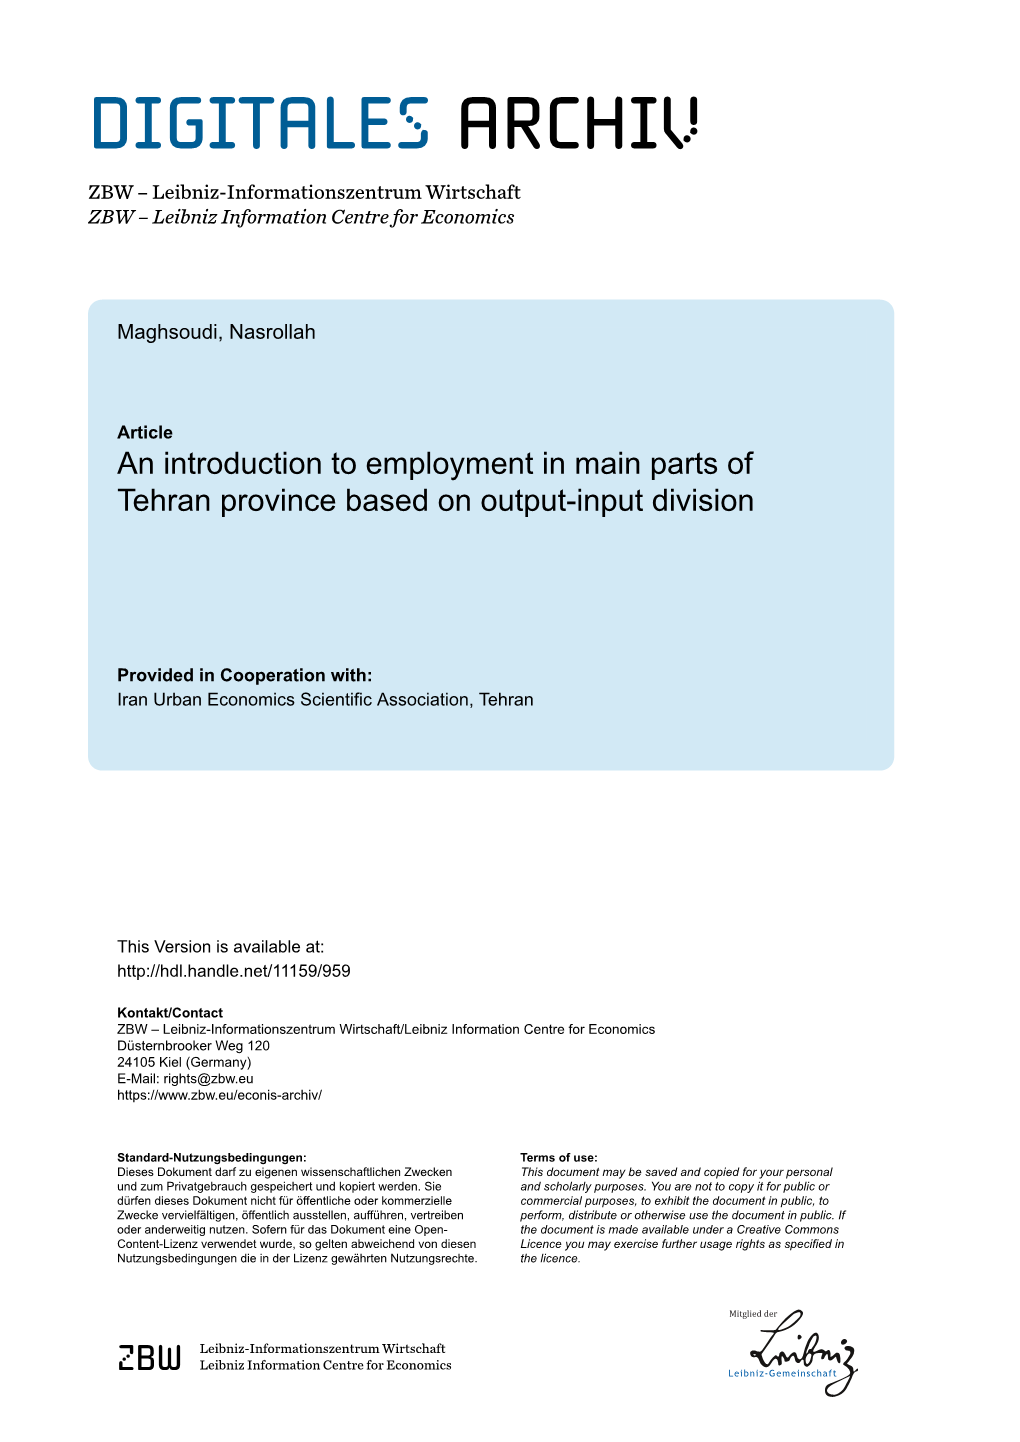 An Introduction to Employment in Main Parts of Tehran Province Based on Output-Input Division